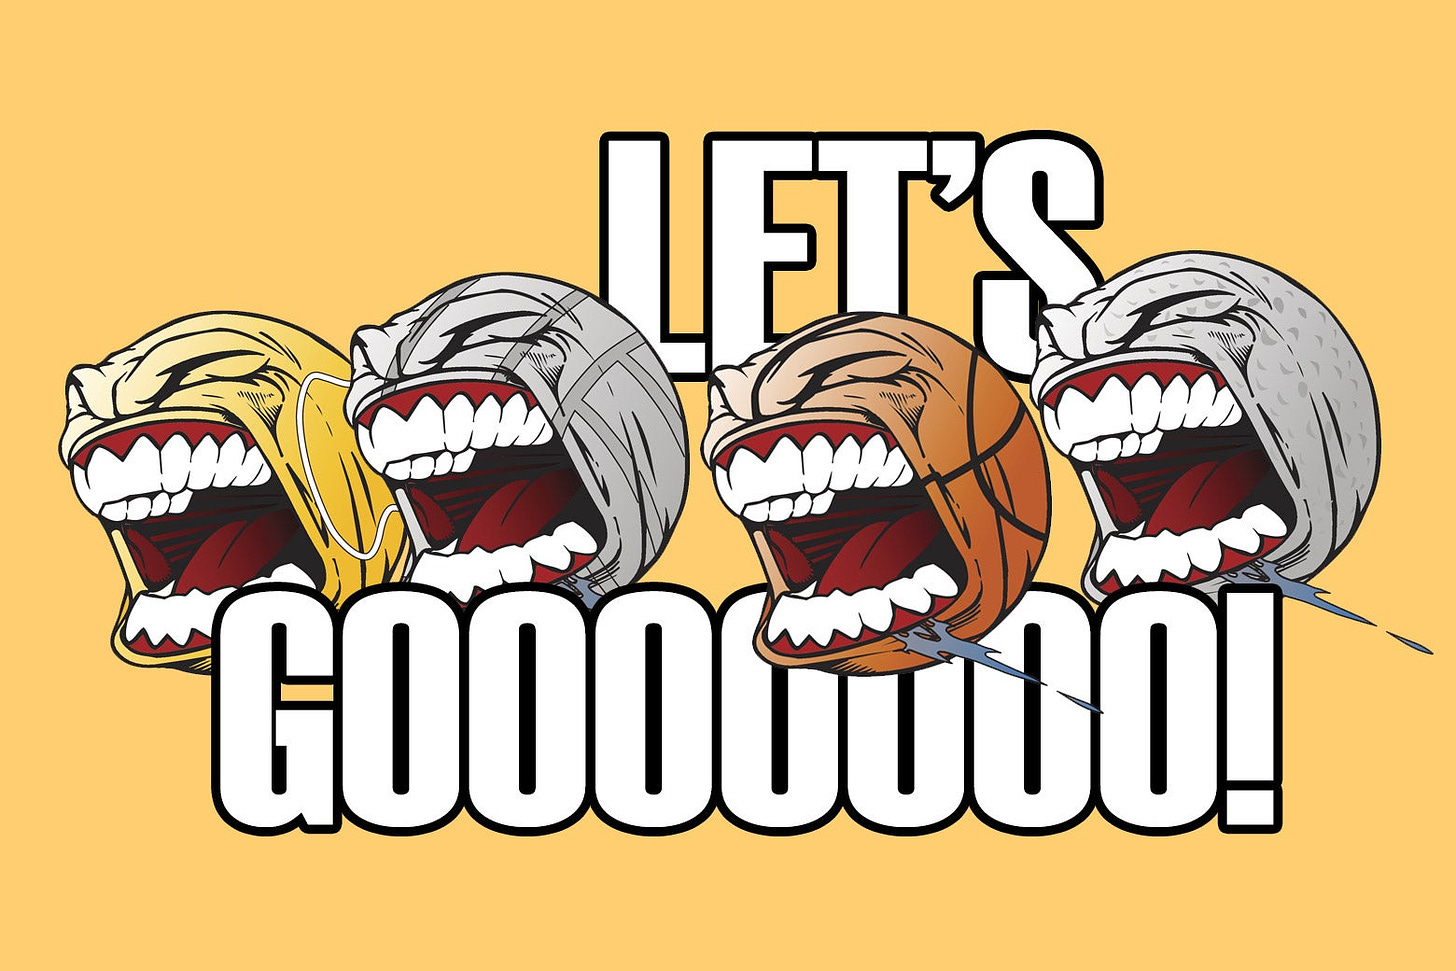 Four let's go meme tennis balls are arranged in a line on a yellow background with white text that says "Let's Gooooooo!"